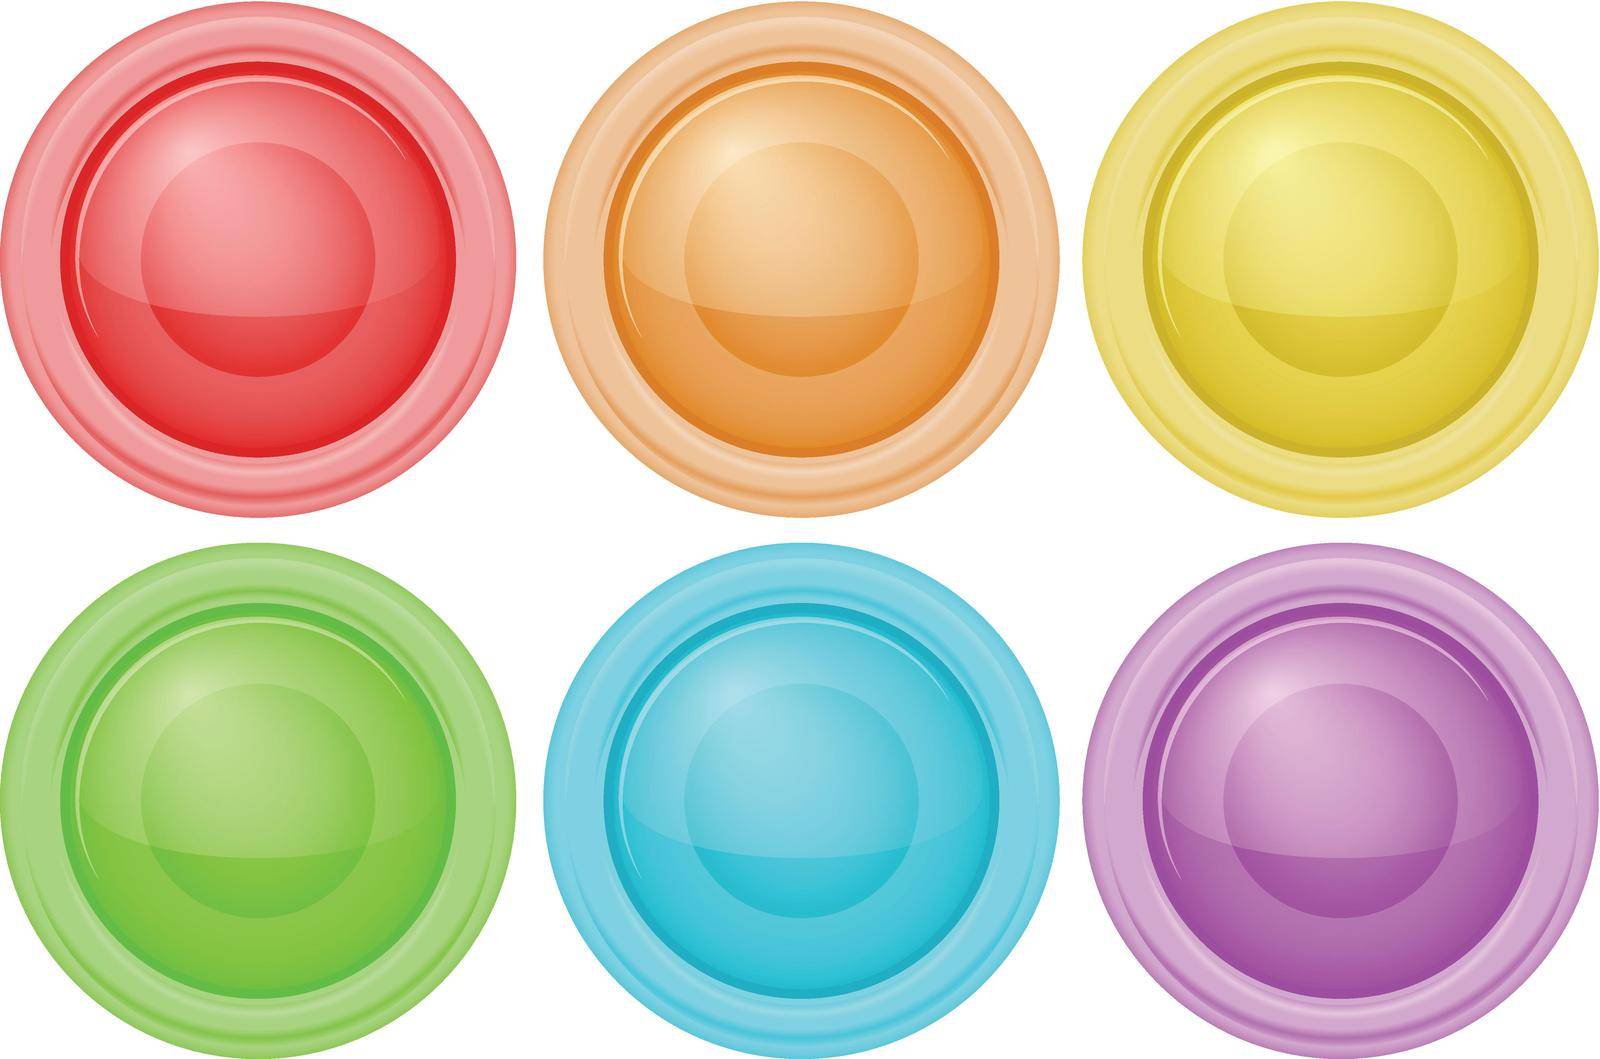 Illustration of the web buttons on a white background